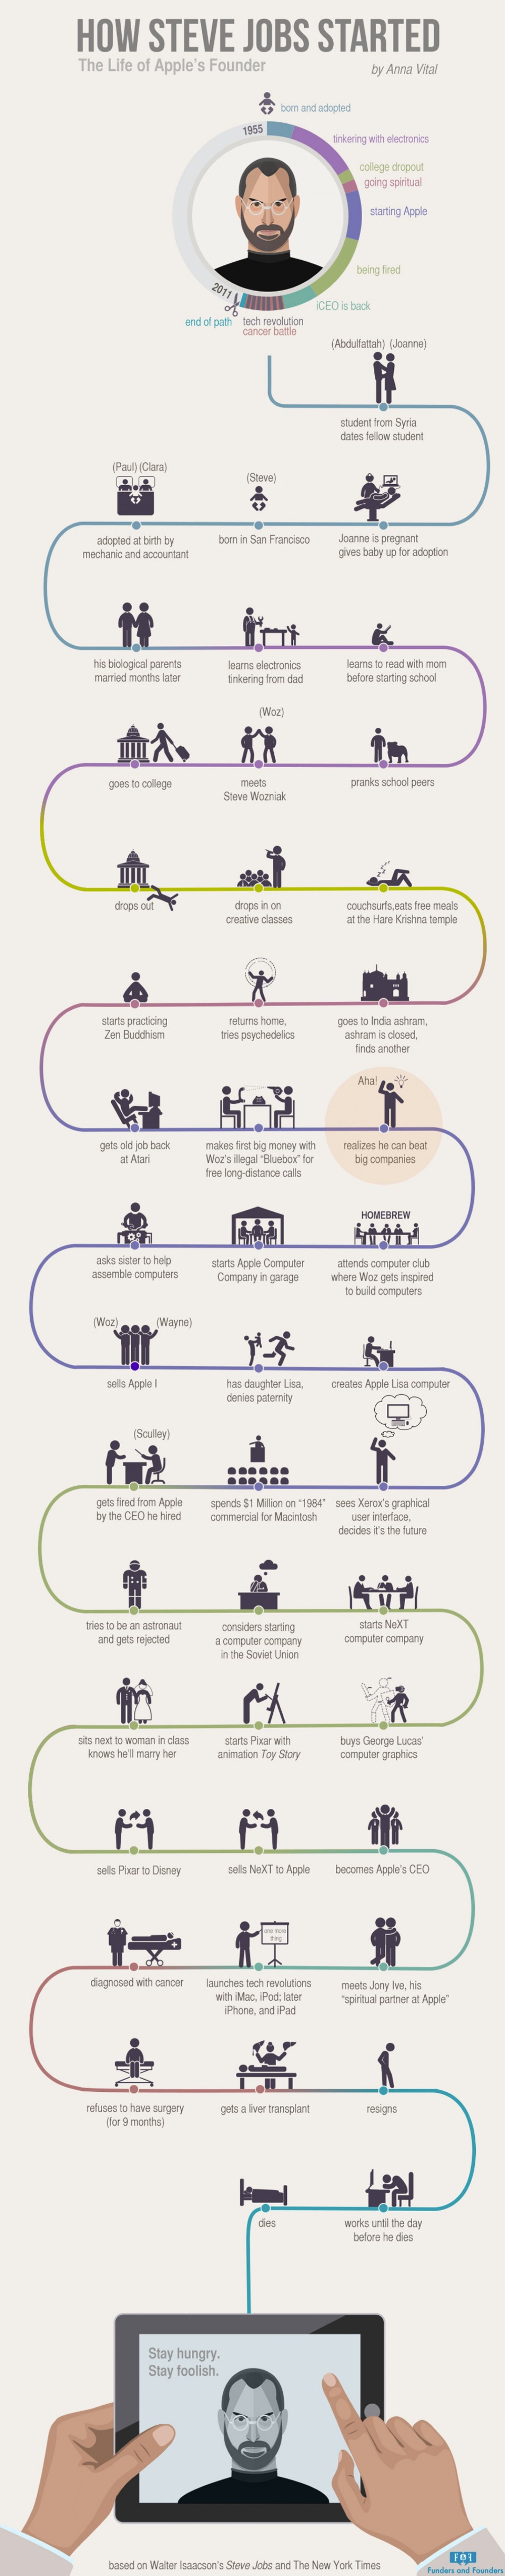 1411148094-steve-jobs-pivotal-life-moments-infographic